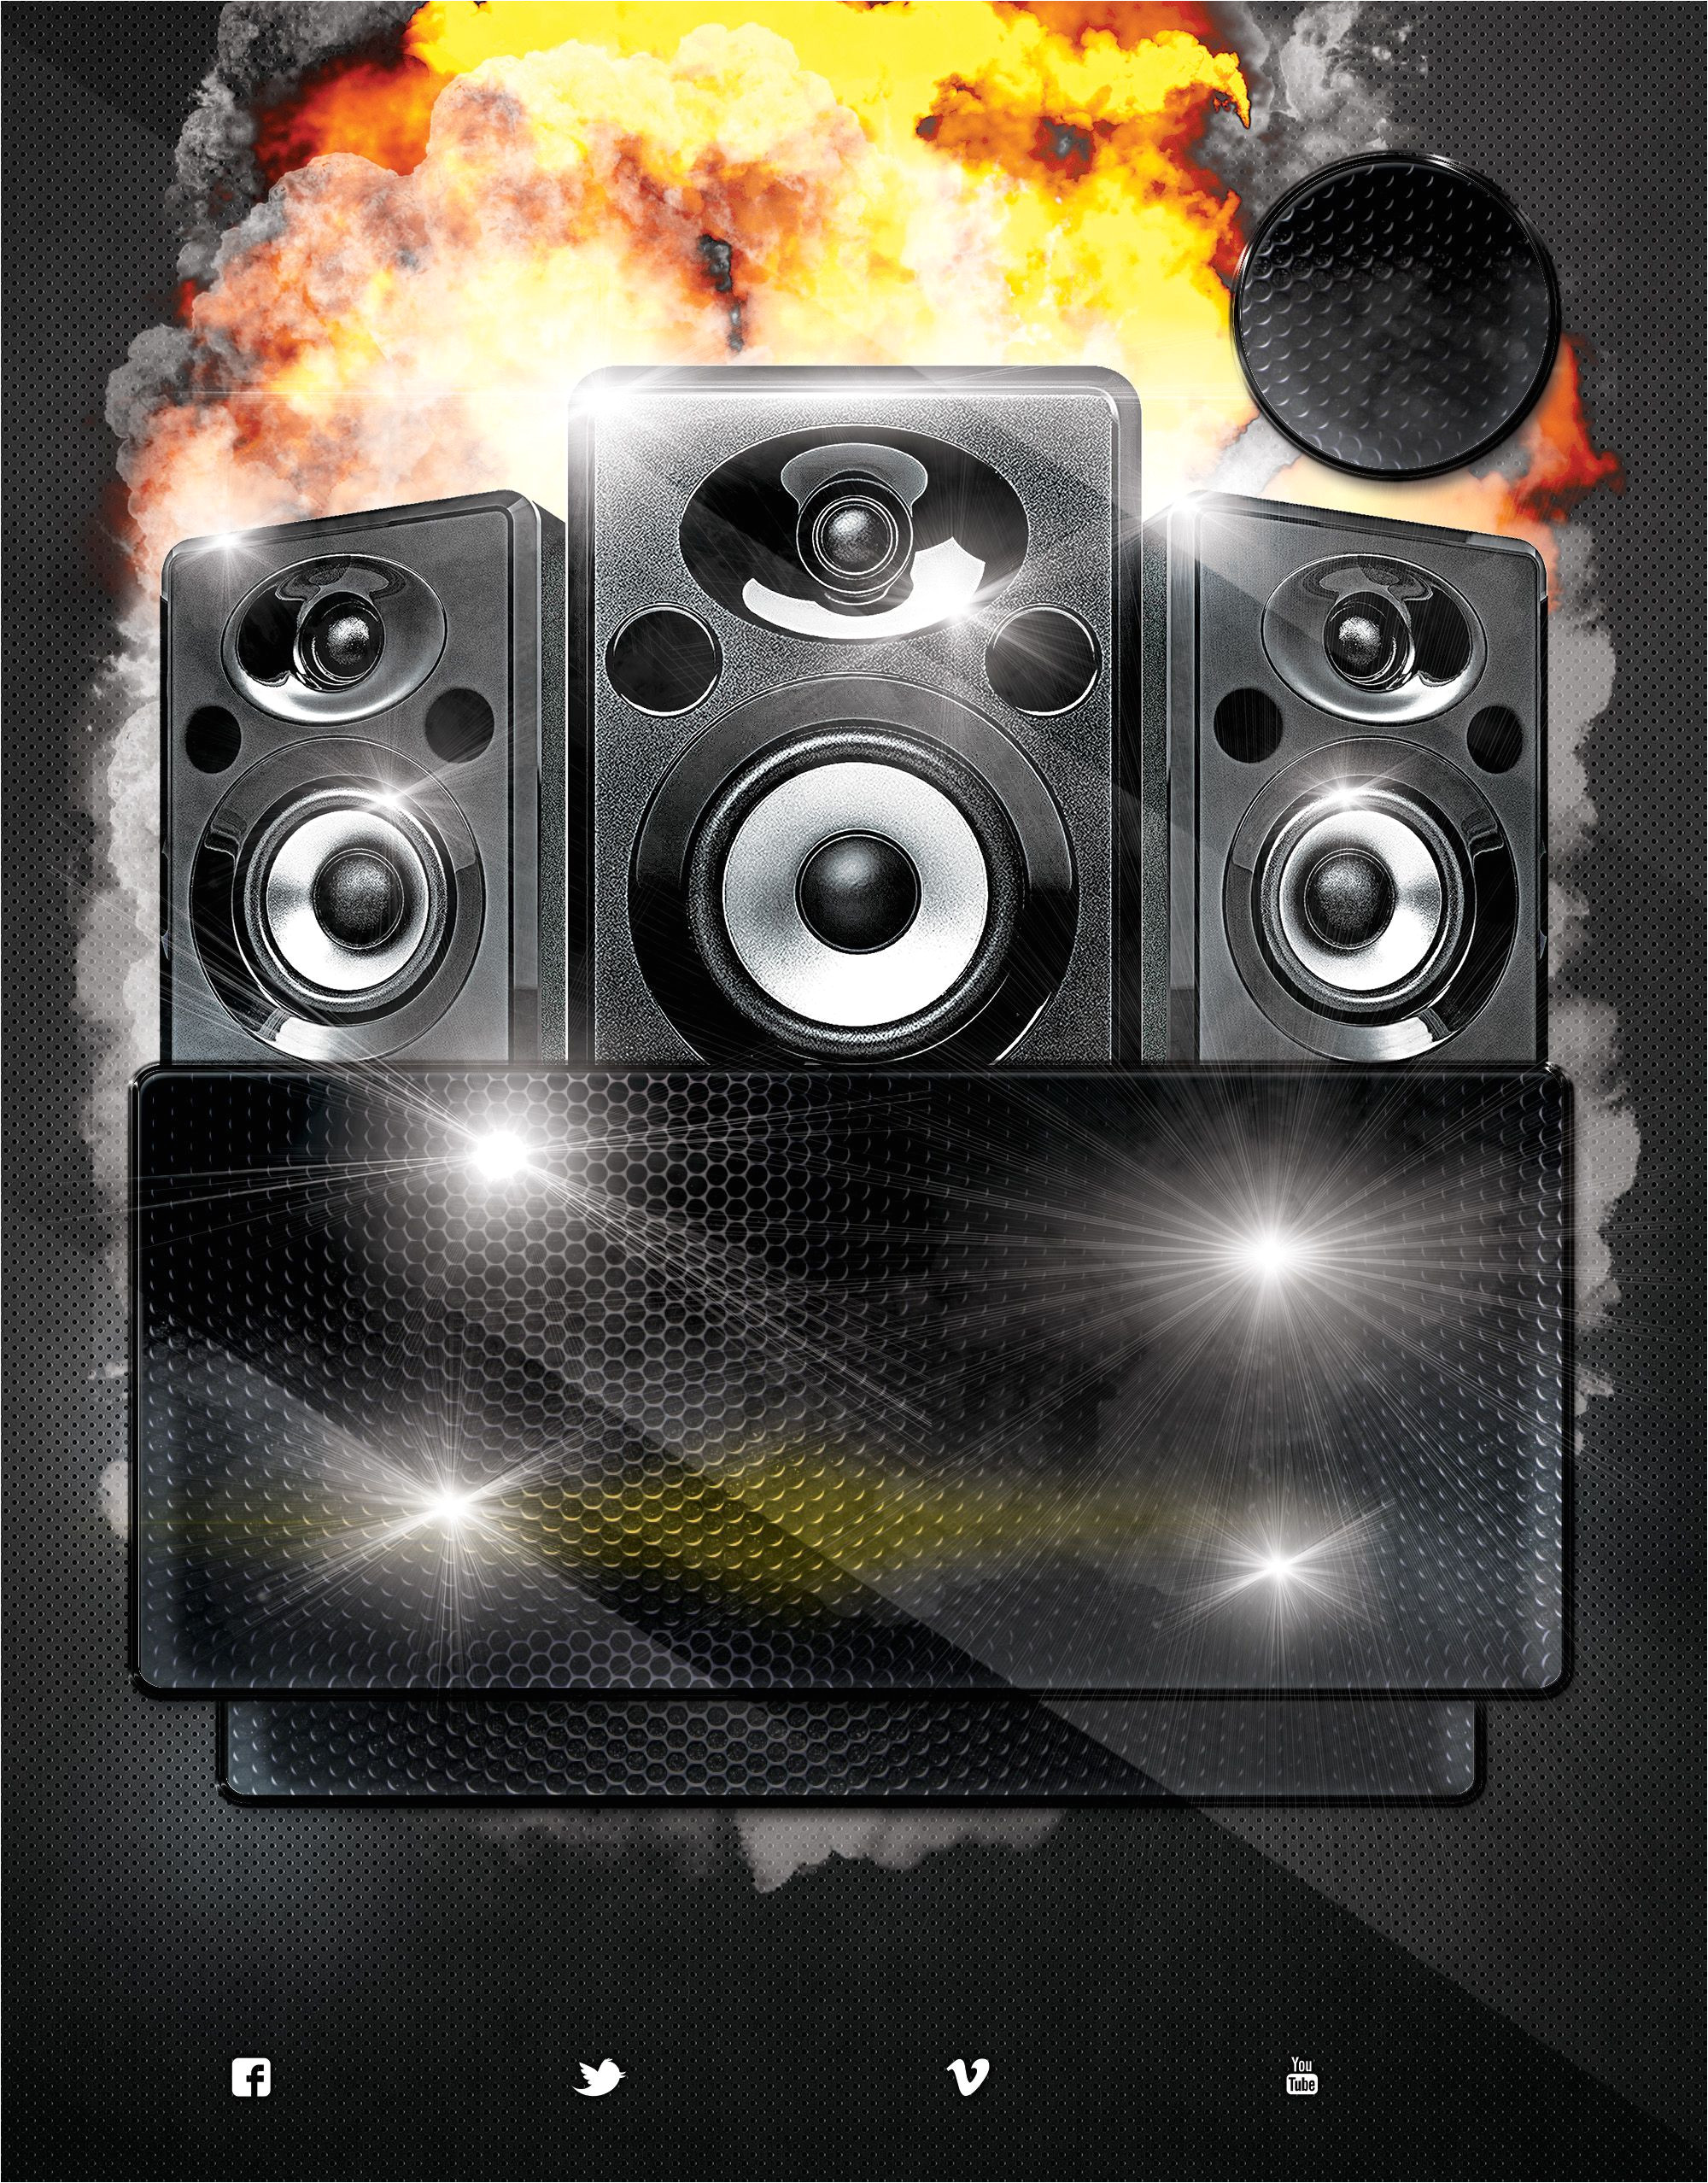 Dj Visiting Card Background Hd Nightclubs Carnival Background Material Con Imagenes